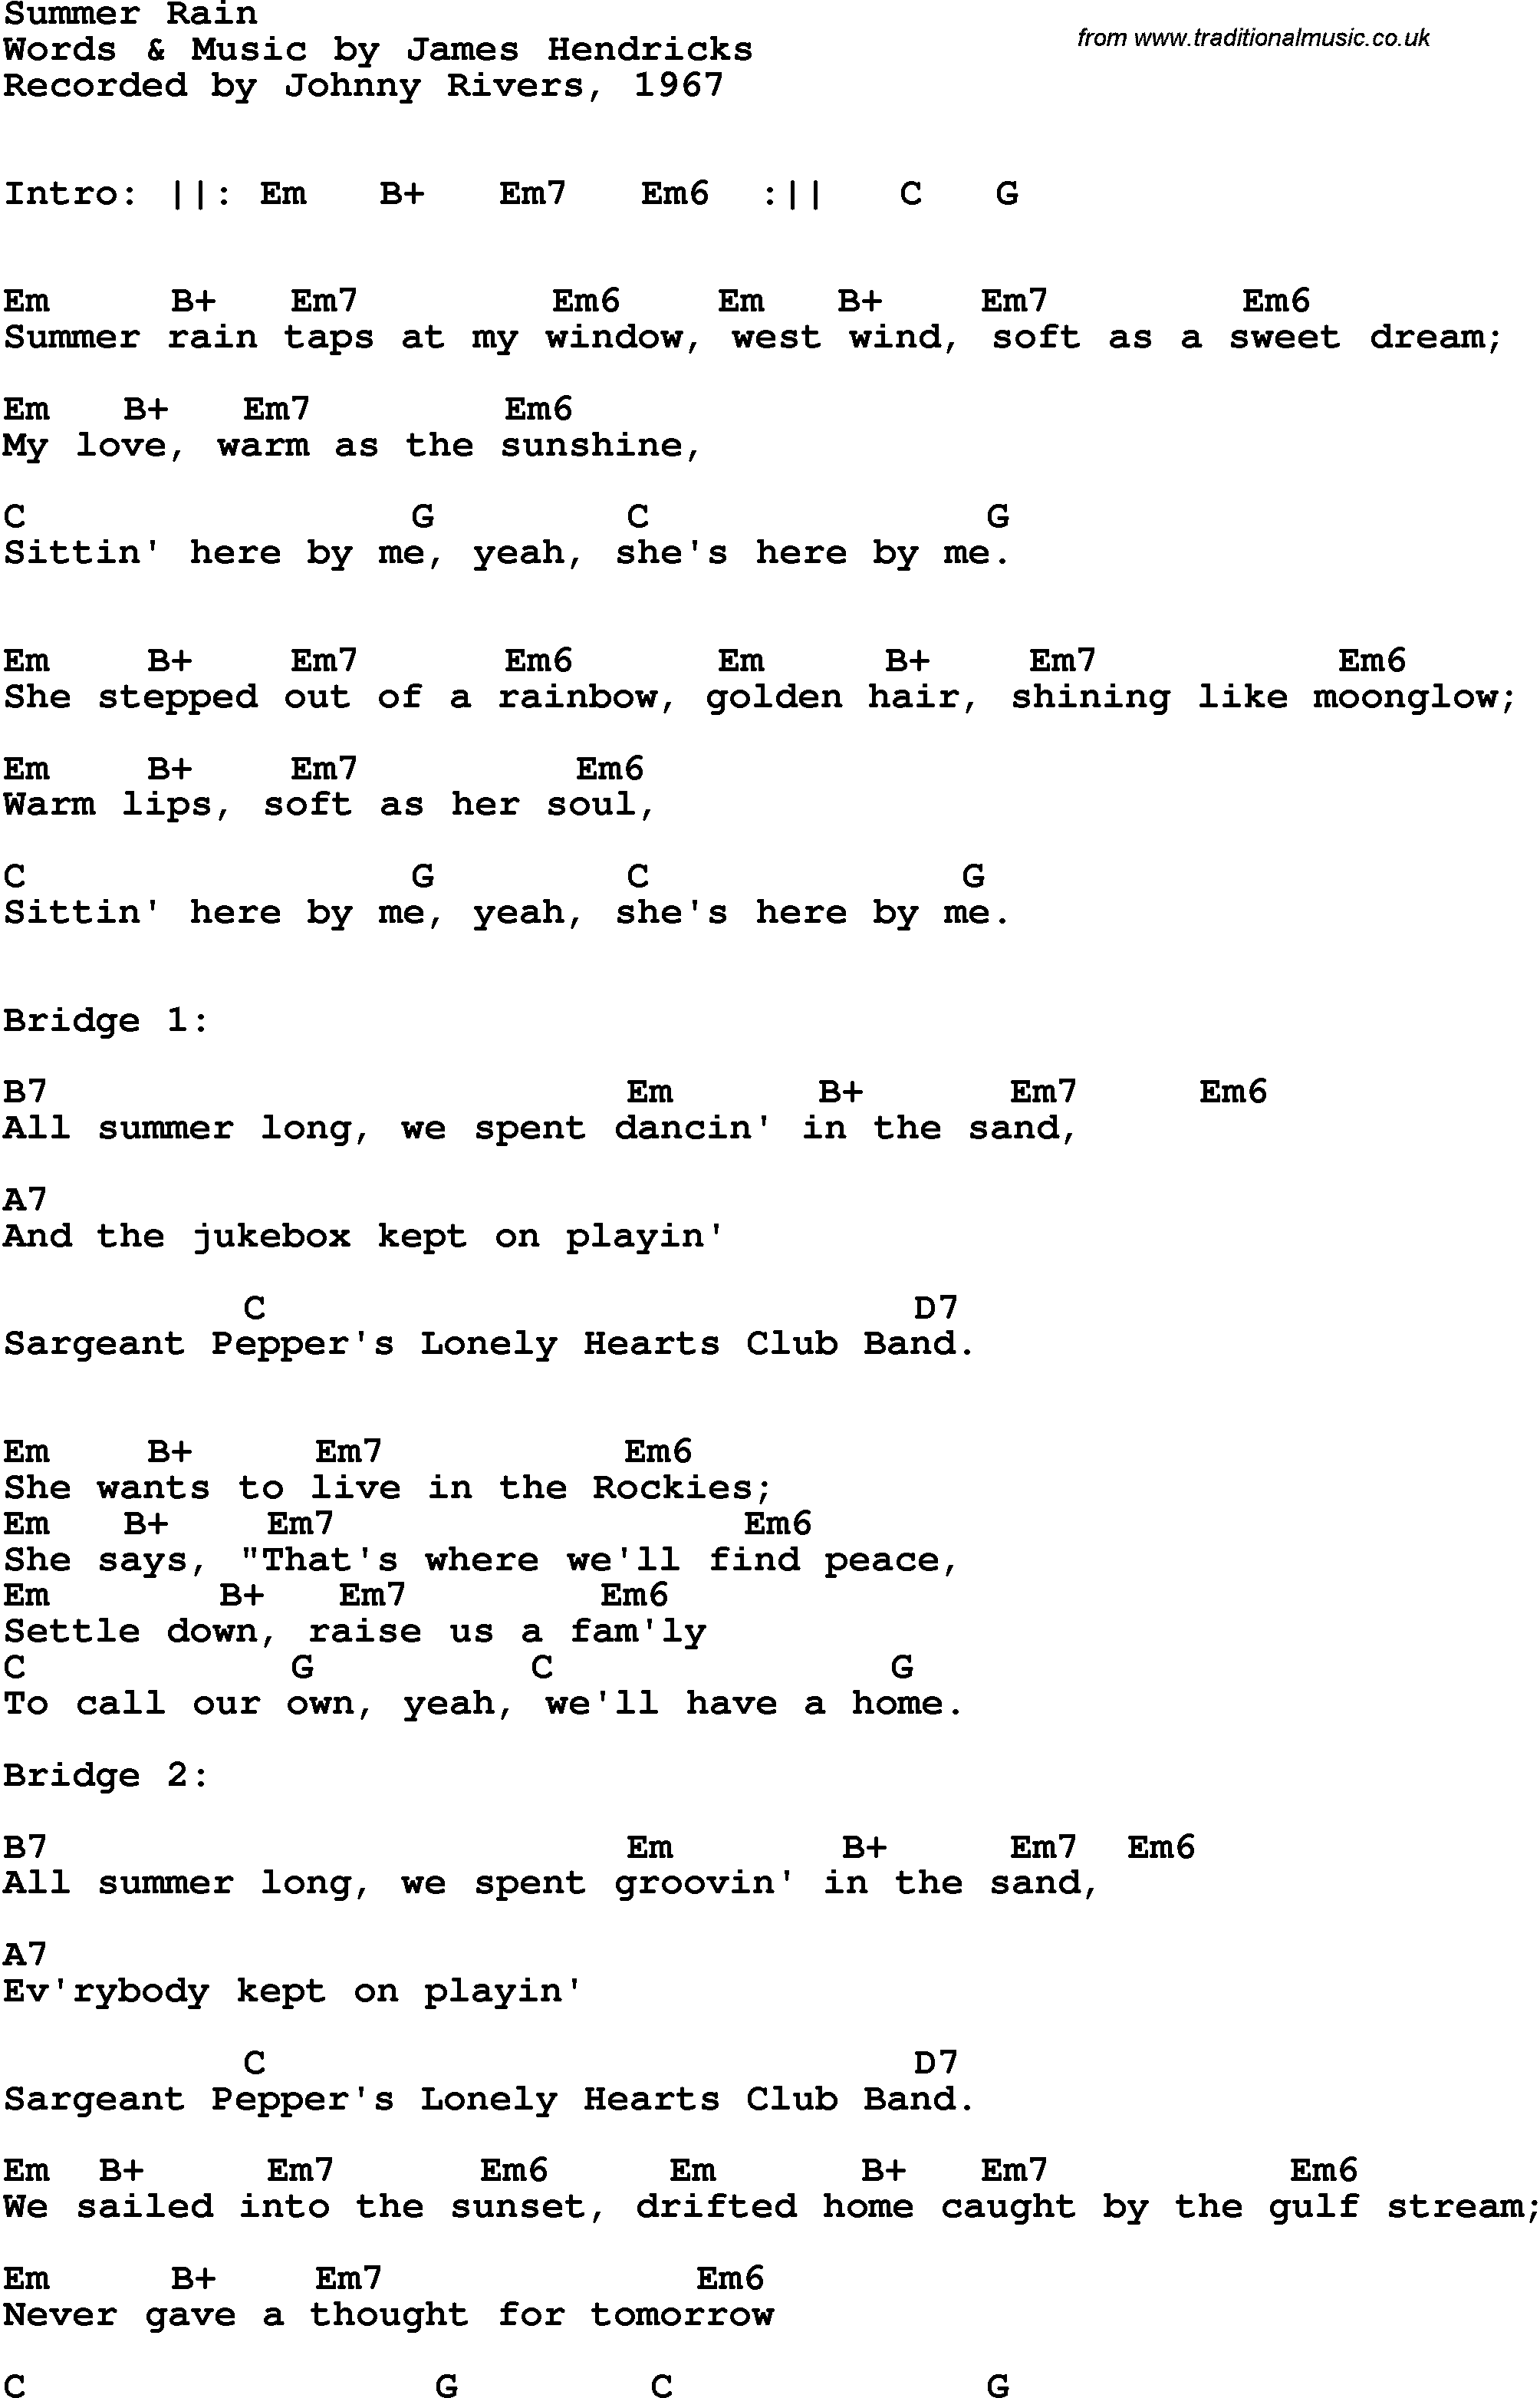 Song Lyrics with guitar chords for Summer Rain - Johnny Rivers, 1967